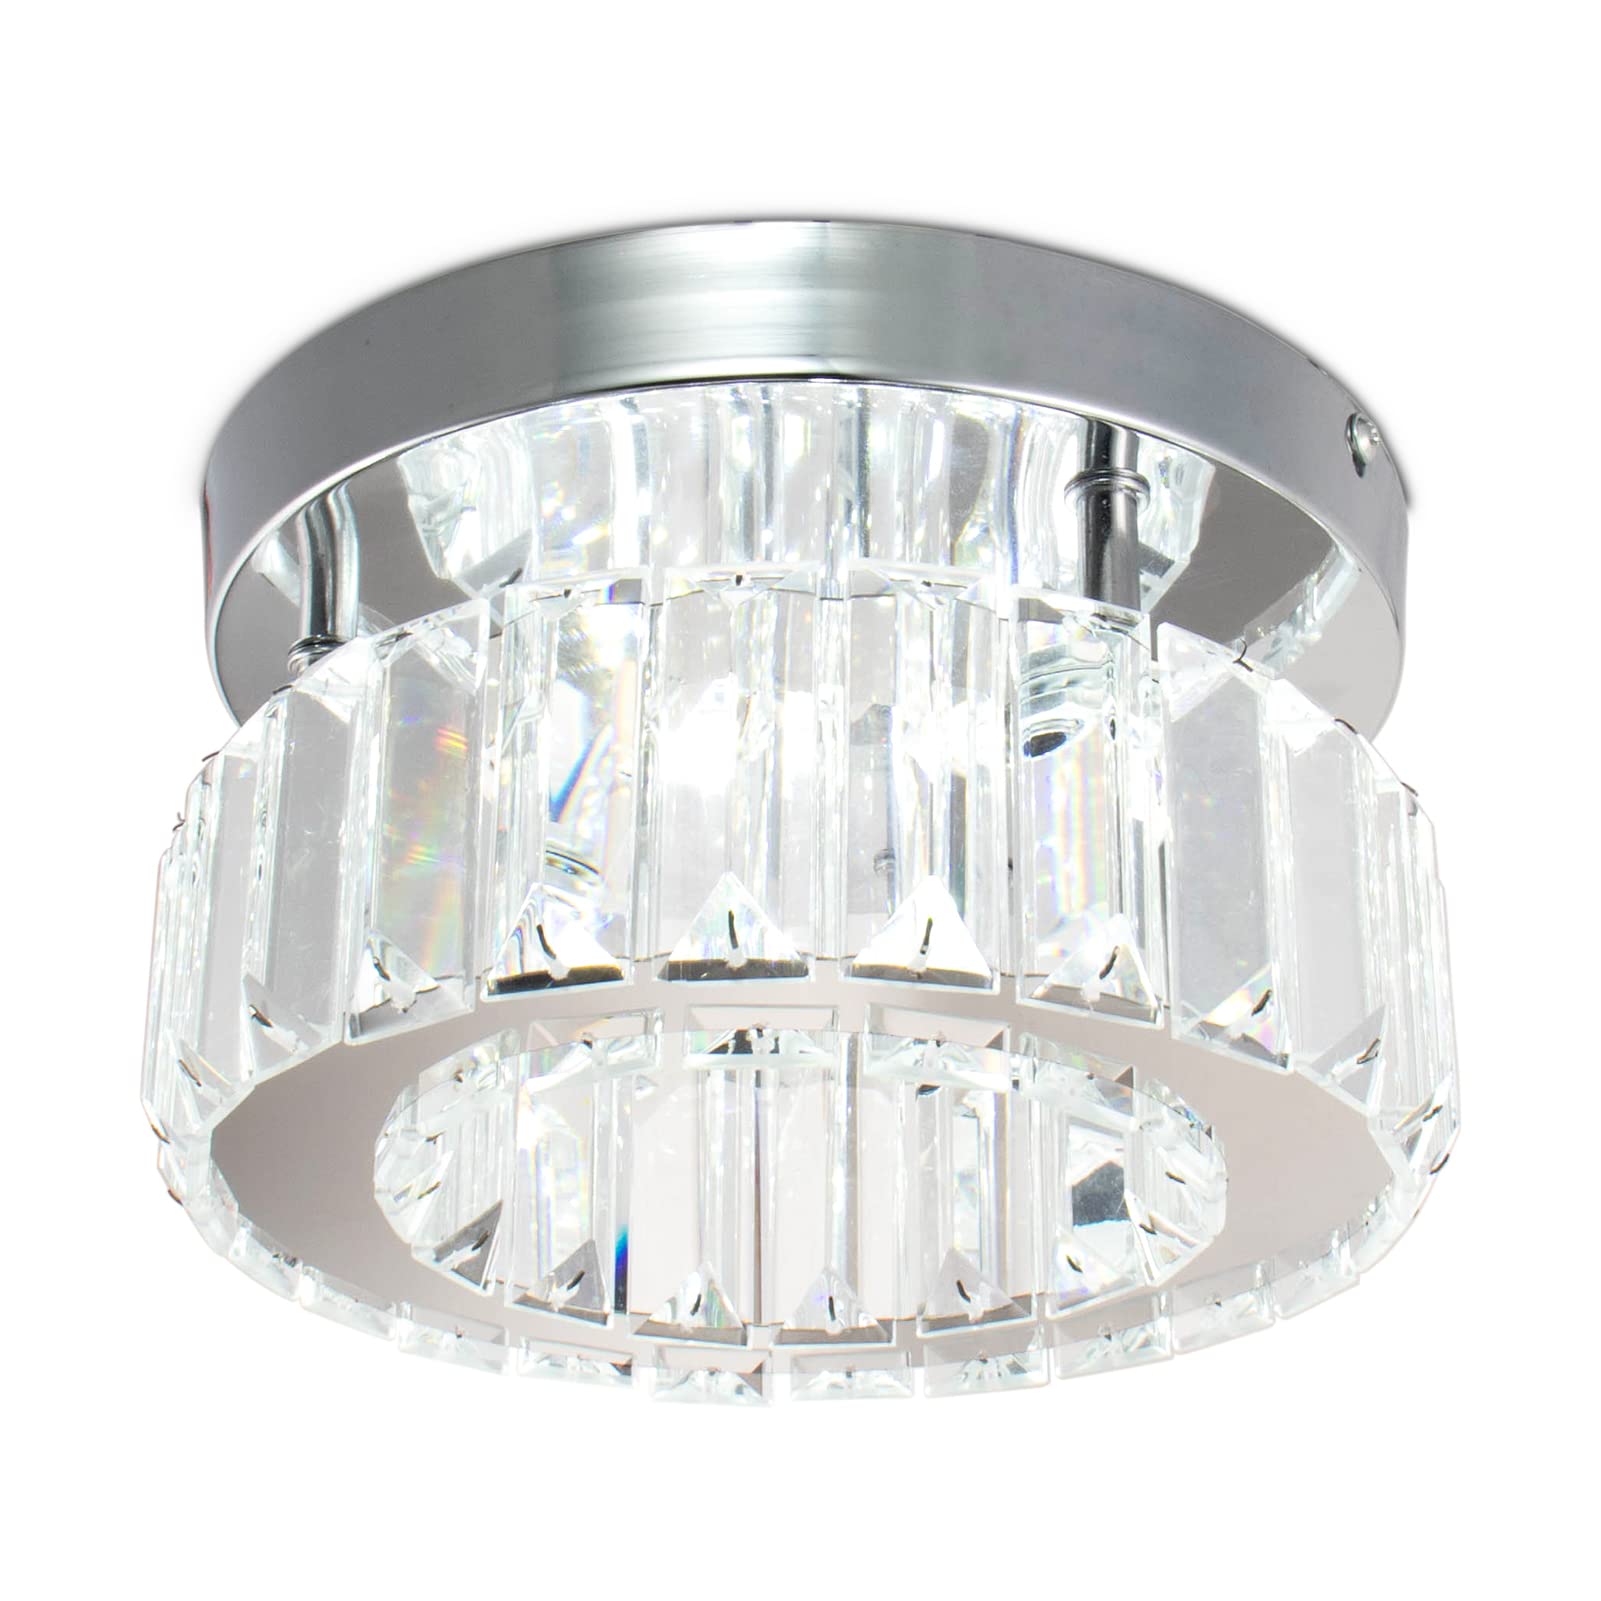 Modern Crystal Chandeliers Ceiling, Round Small Chandeliers 6500K White Semi Flush Mount Ceiling Light for Living Room Dining Room Hallway Foyer Living Room Small Room